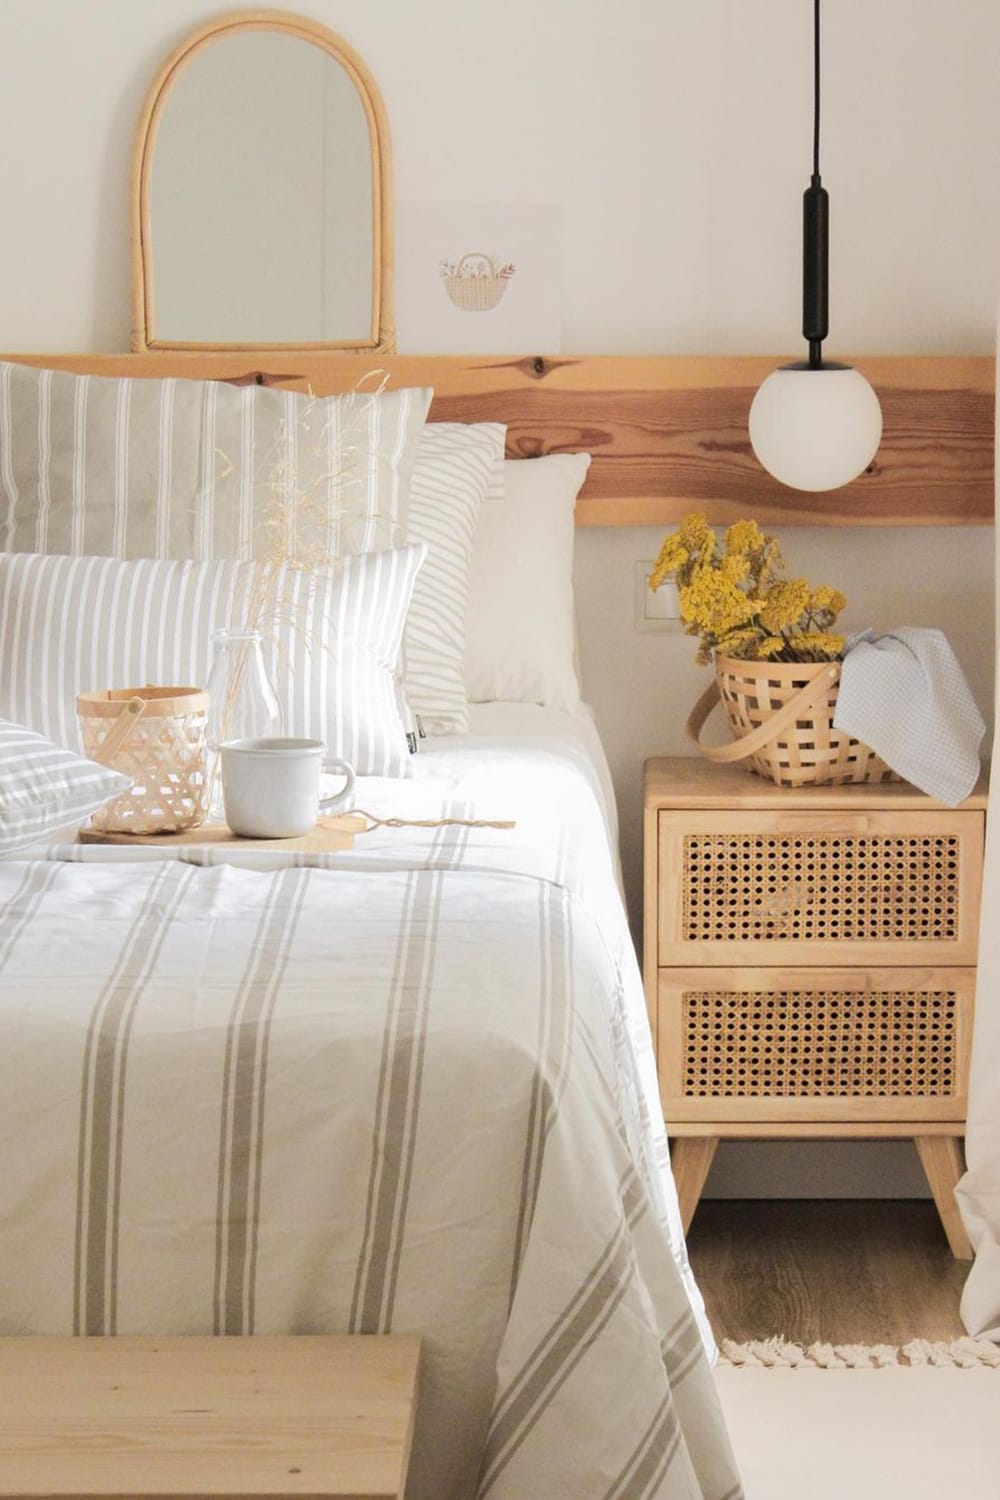 A rustic bedroom decorated with striped textiles